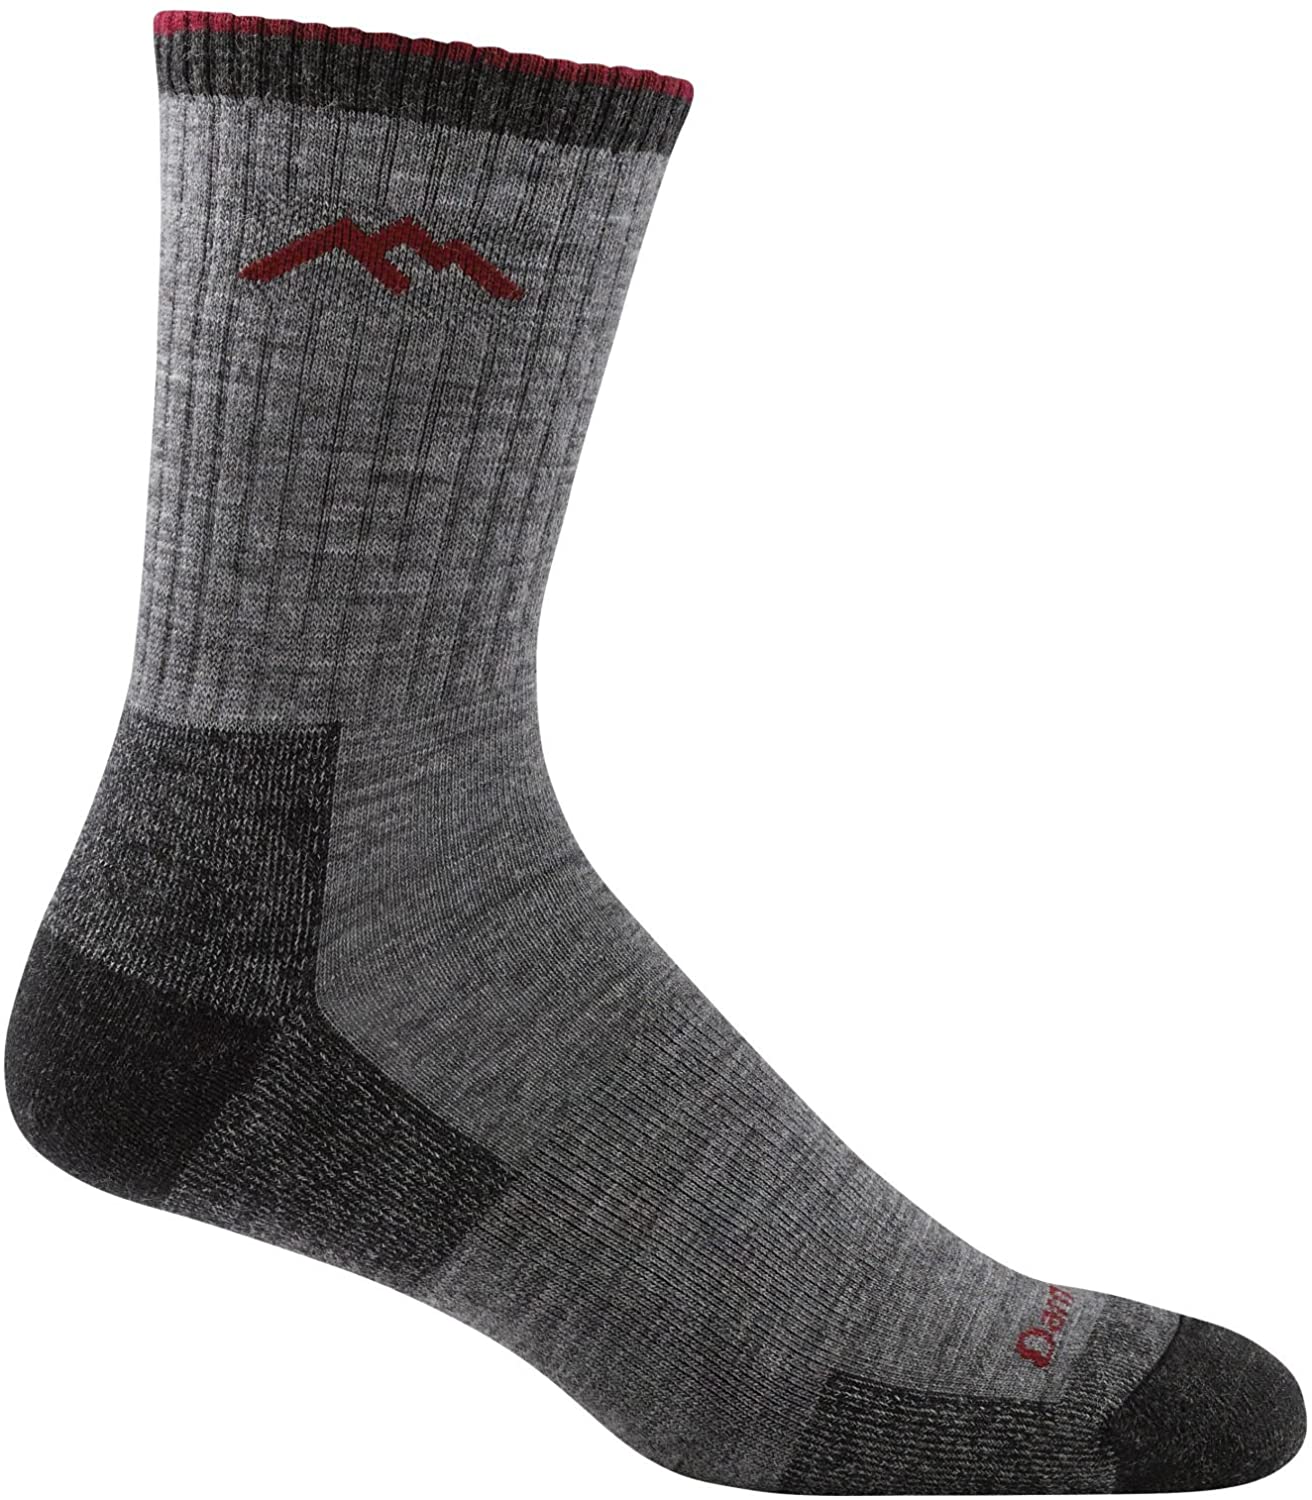 Men's Darn Tough Hiker Micro Crew Midweight with Cushion Sock in Charcoal